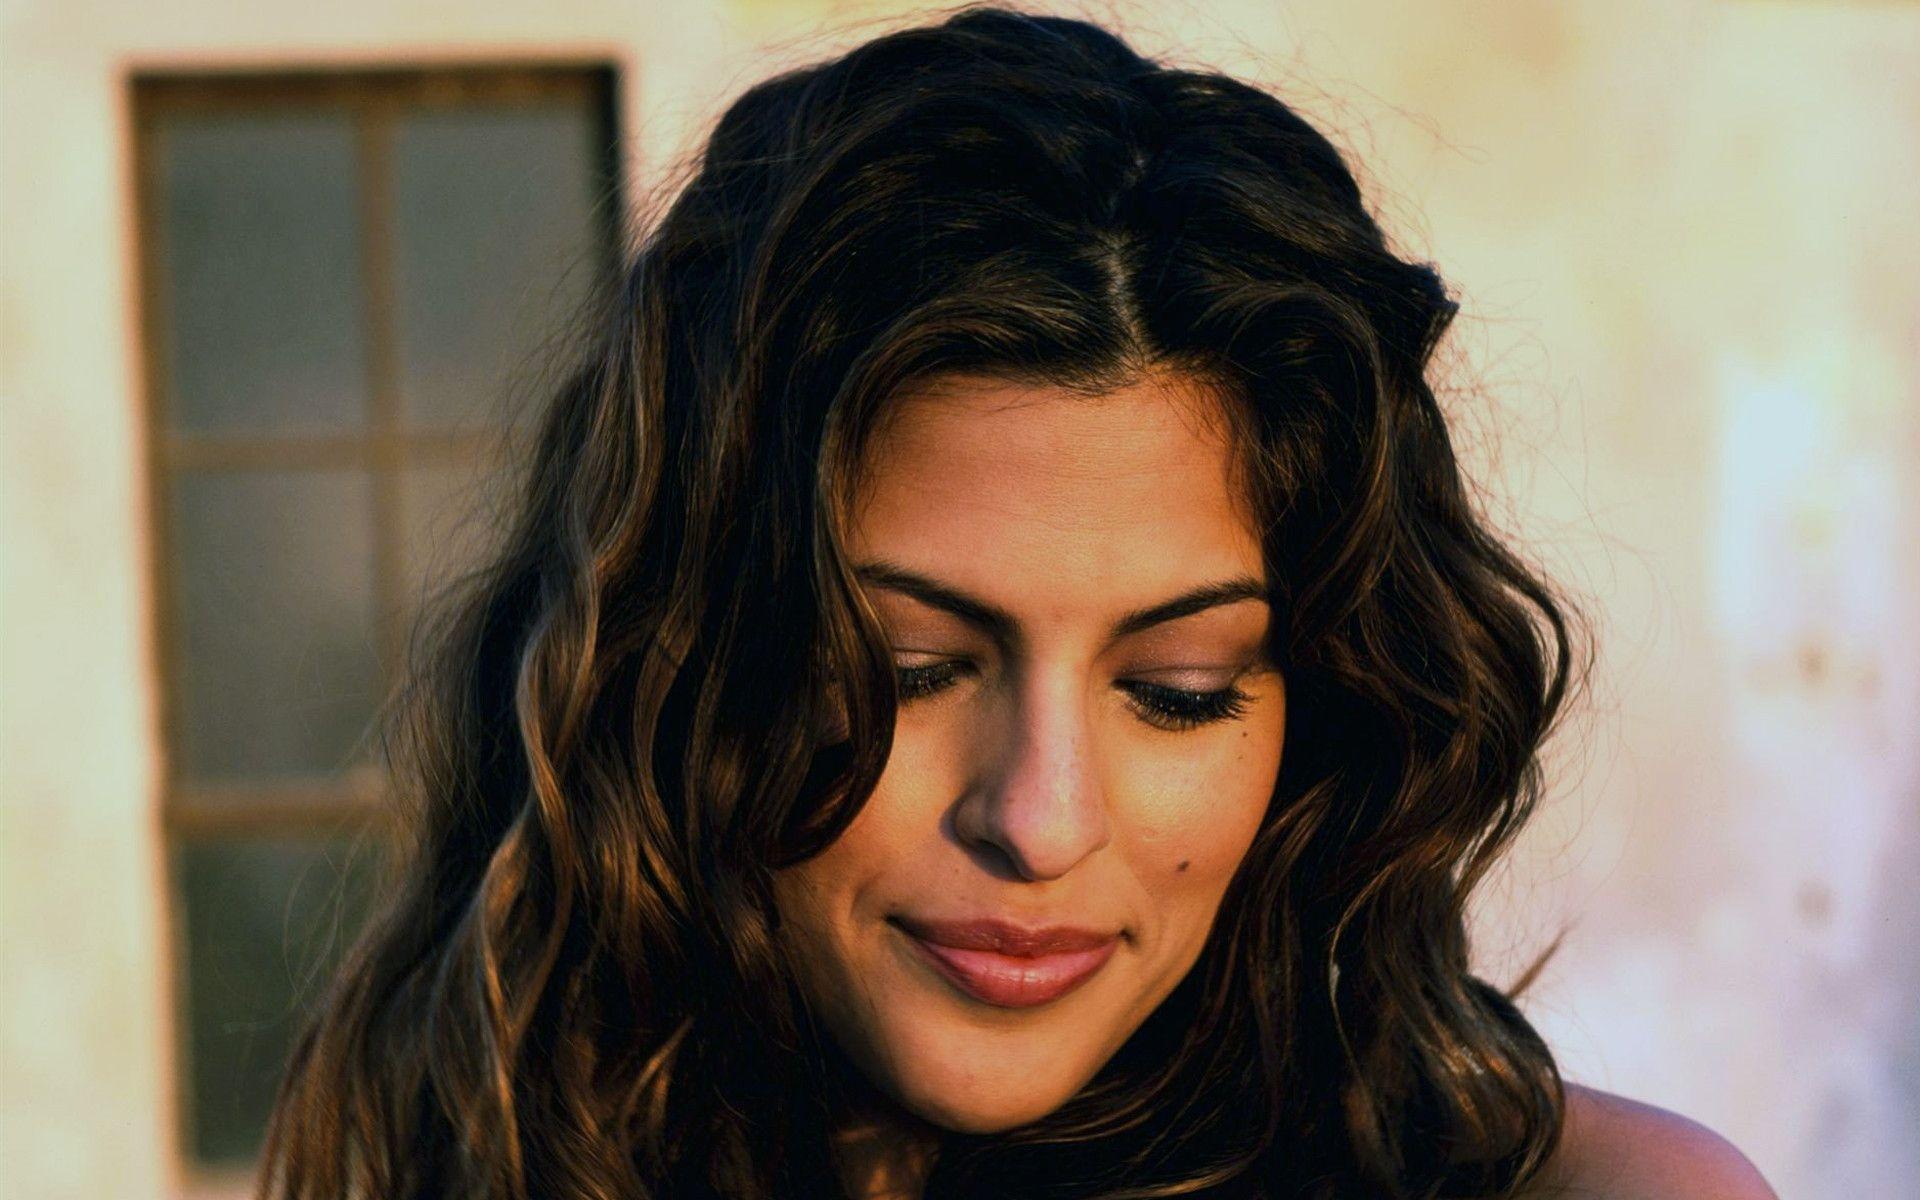 Eva Mendes: Portrayed Gina in a 2002 buddy action comedy film, All About the Benjamins. 1920x1200 HD Wallpaper.